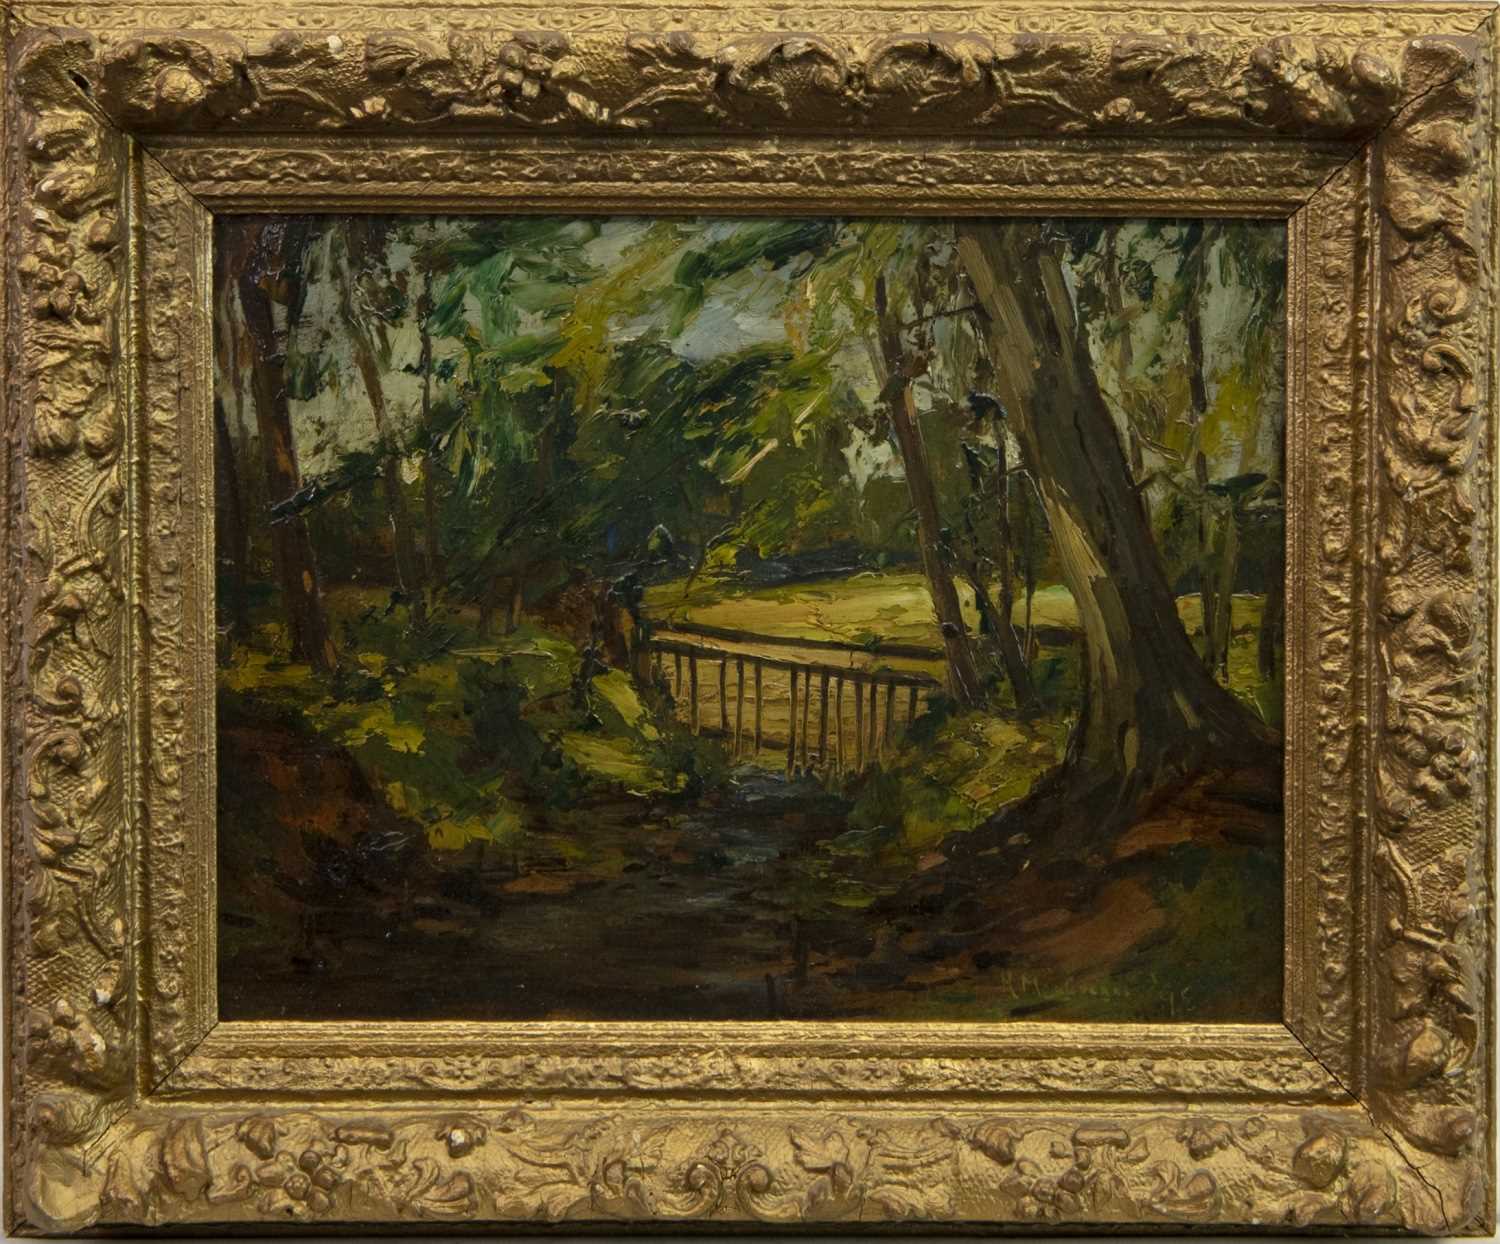 Lot 52 - WOODLAND SCENE, AN OIL BY HARRY MACGREGOR